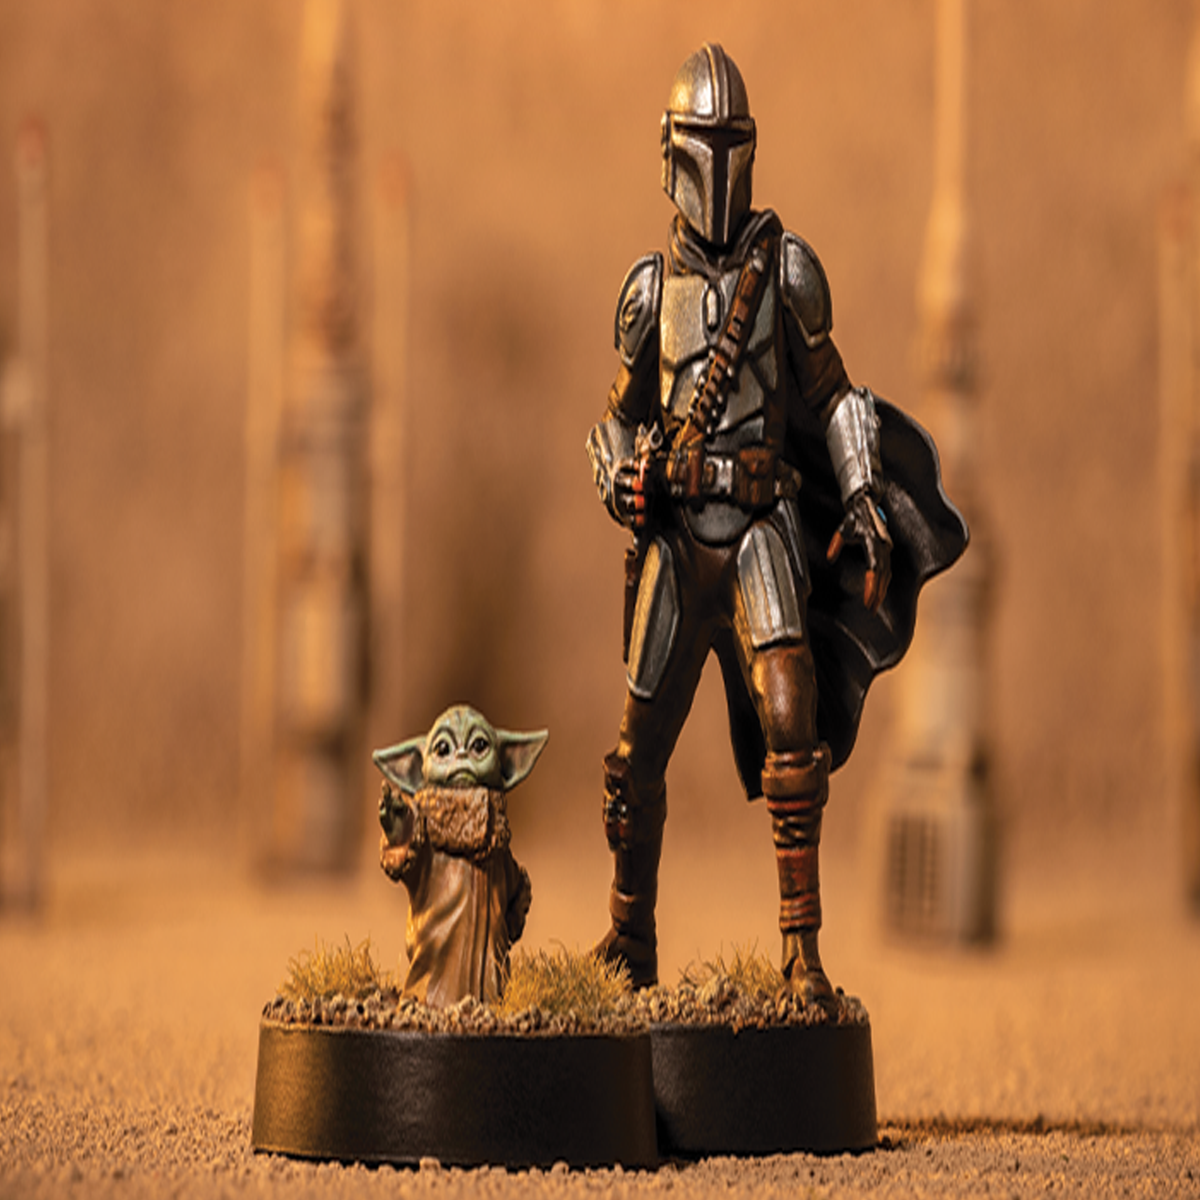 Start Collecting Legion: Grand Army of the Republic - Minis For War  Painting Studio